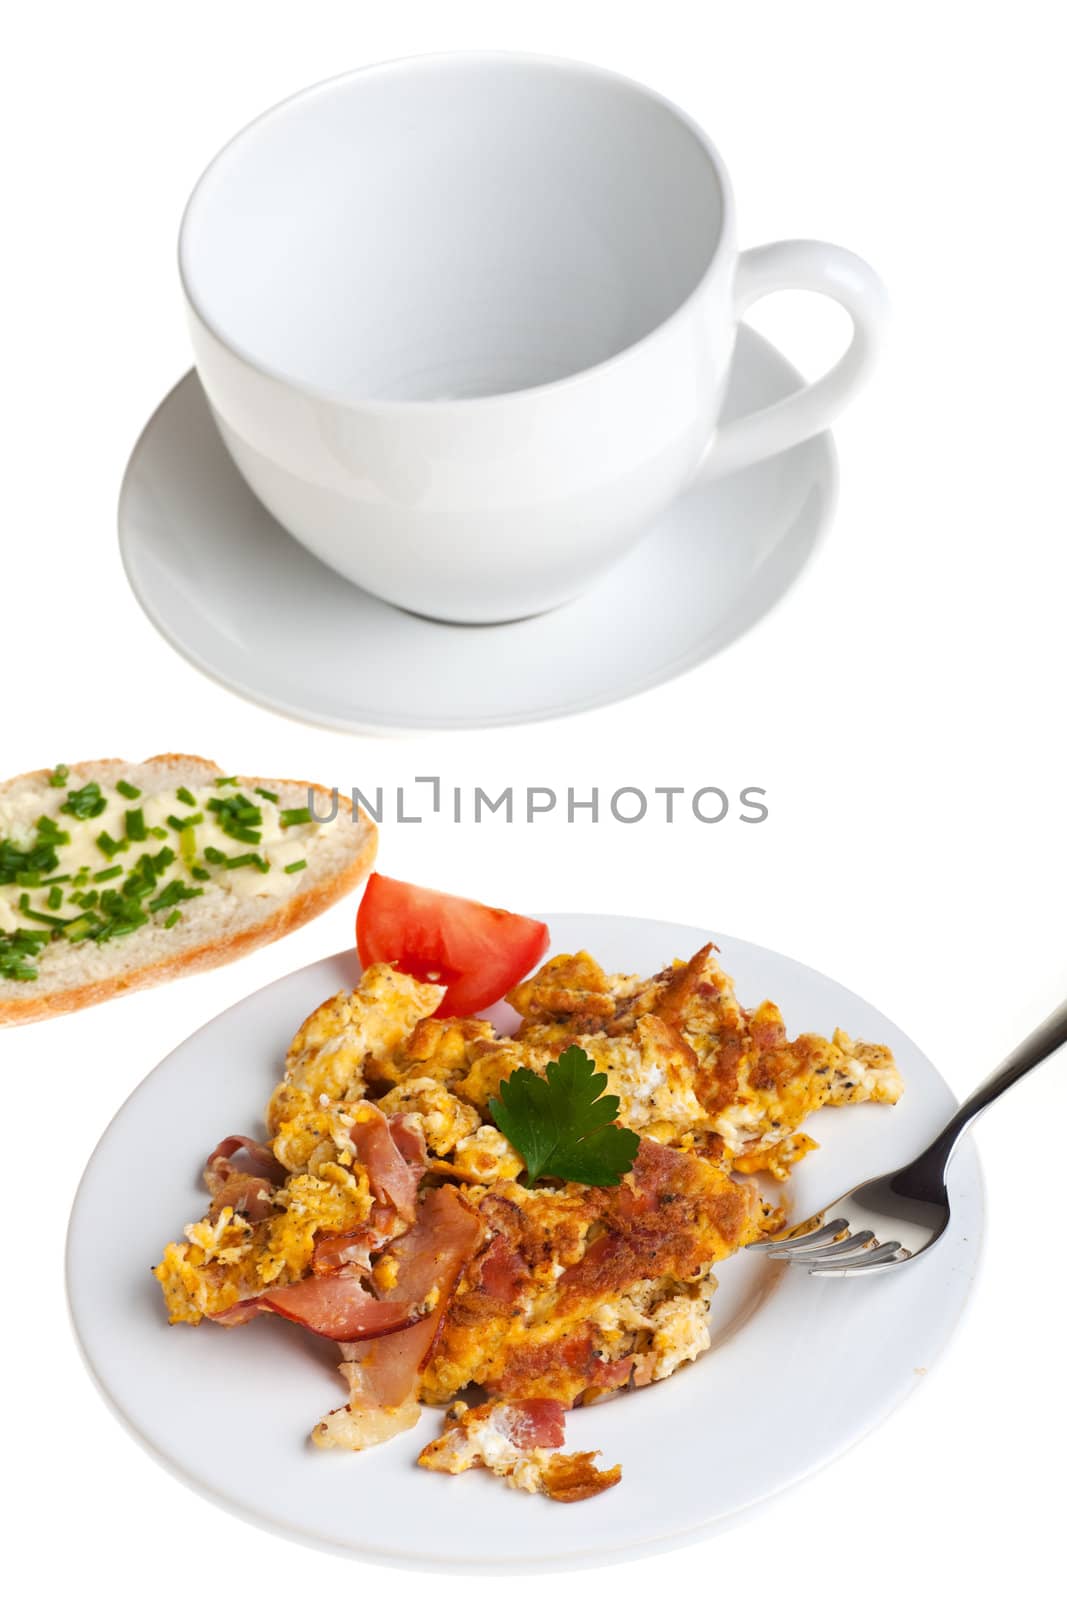 scrambled eggs and bun on a plate isolated on white